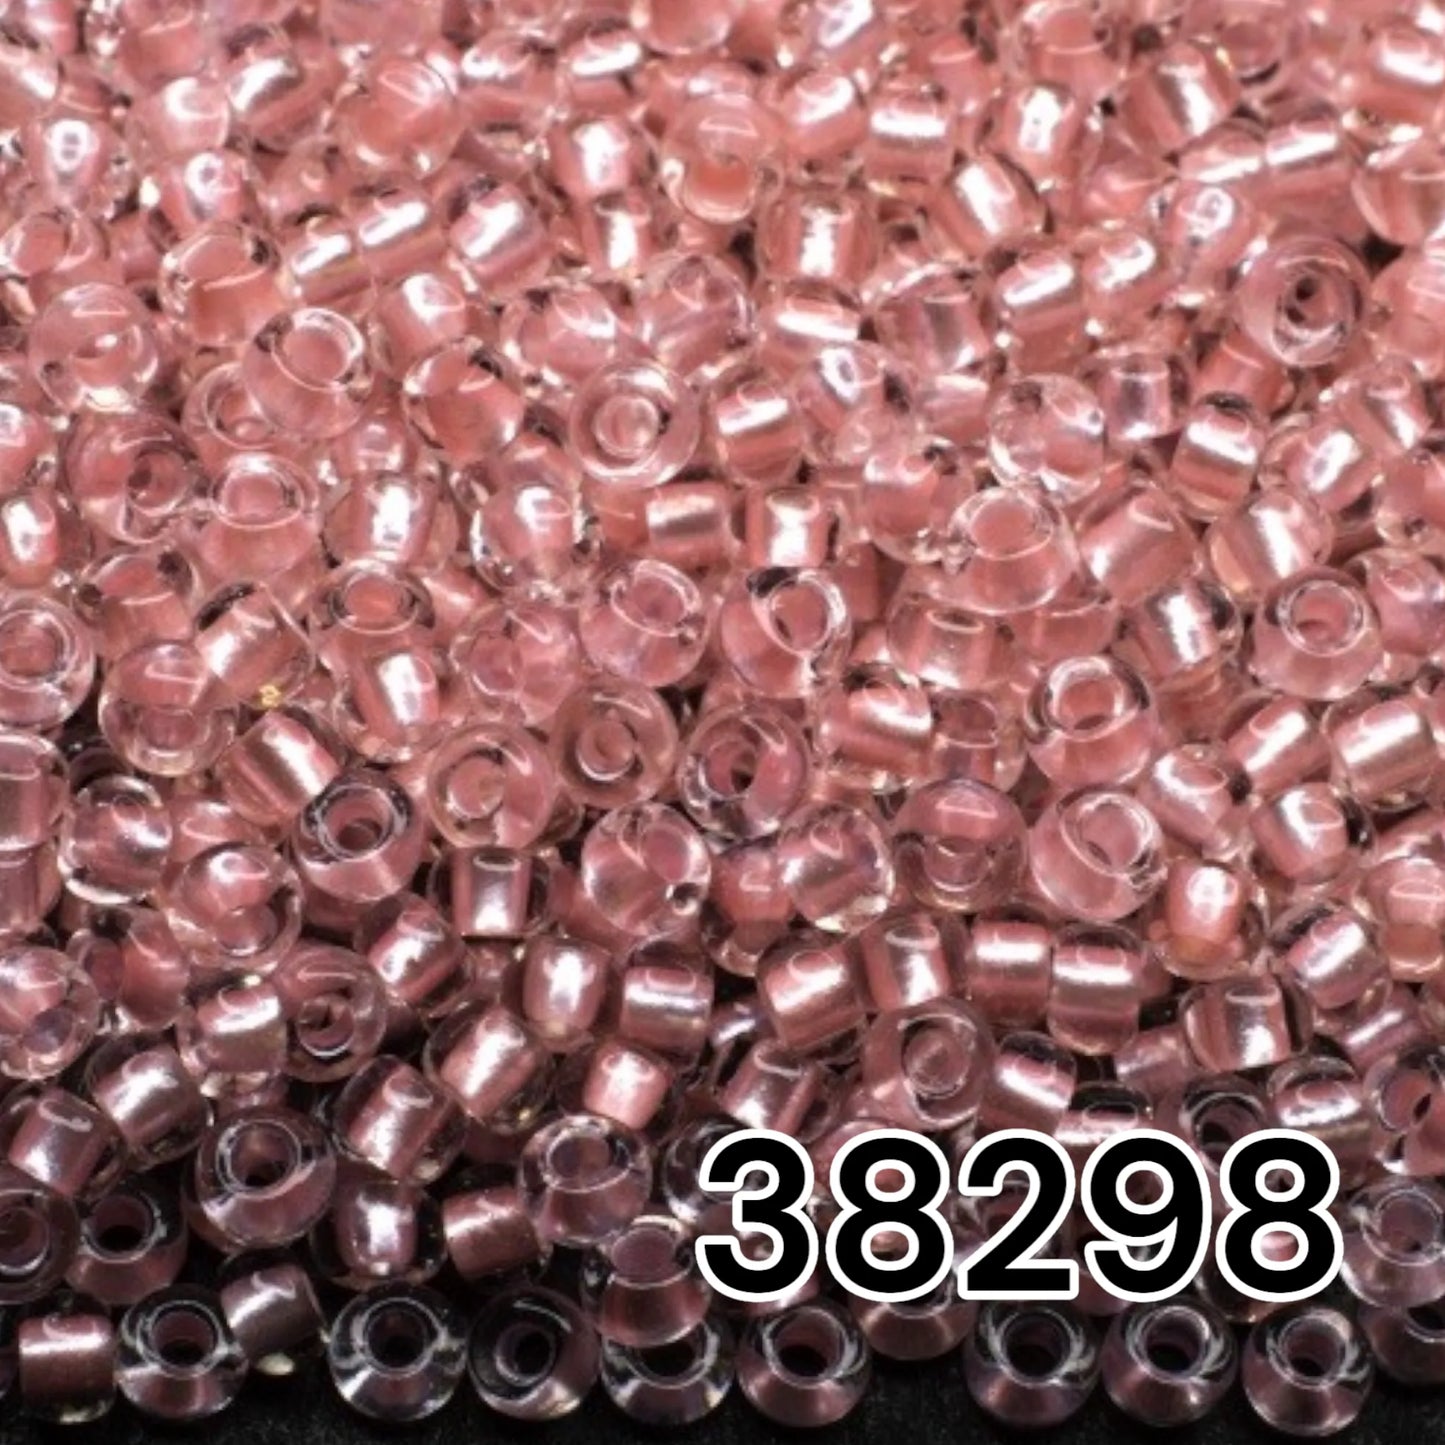 38298 Czech seed beads PRECIOSA Rocailles 10/0 pink. Crystal - Terra Pearl Lined.